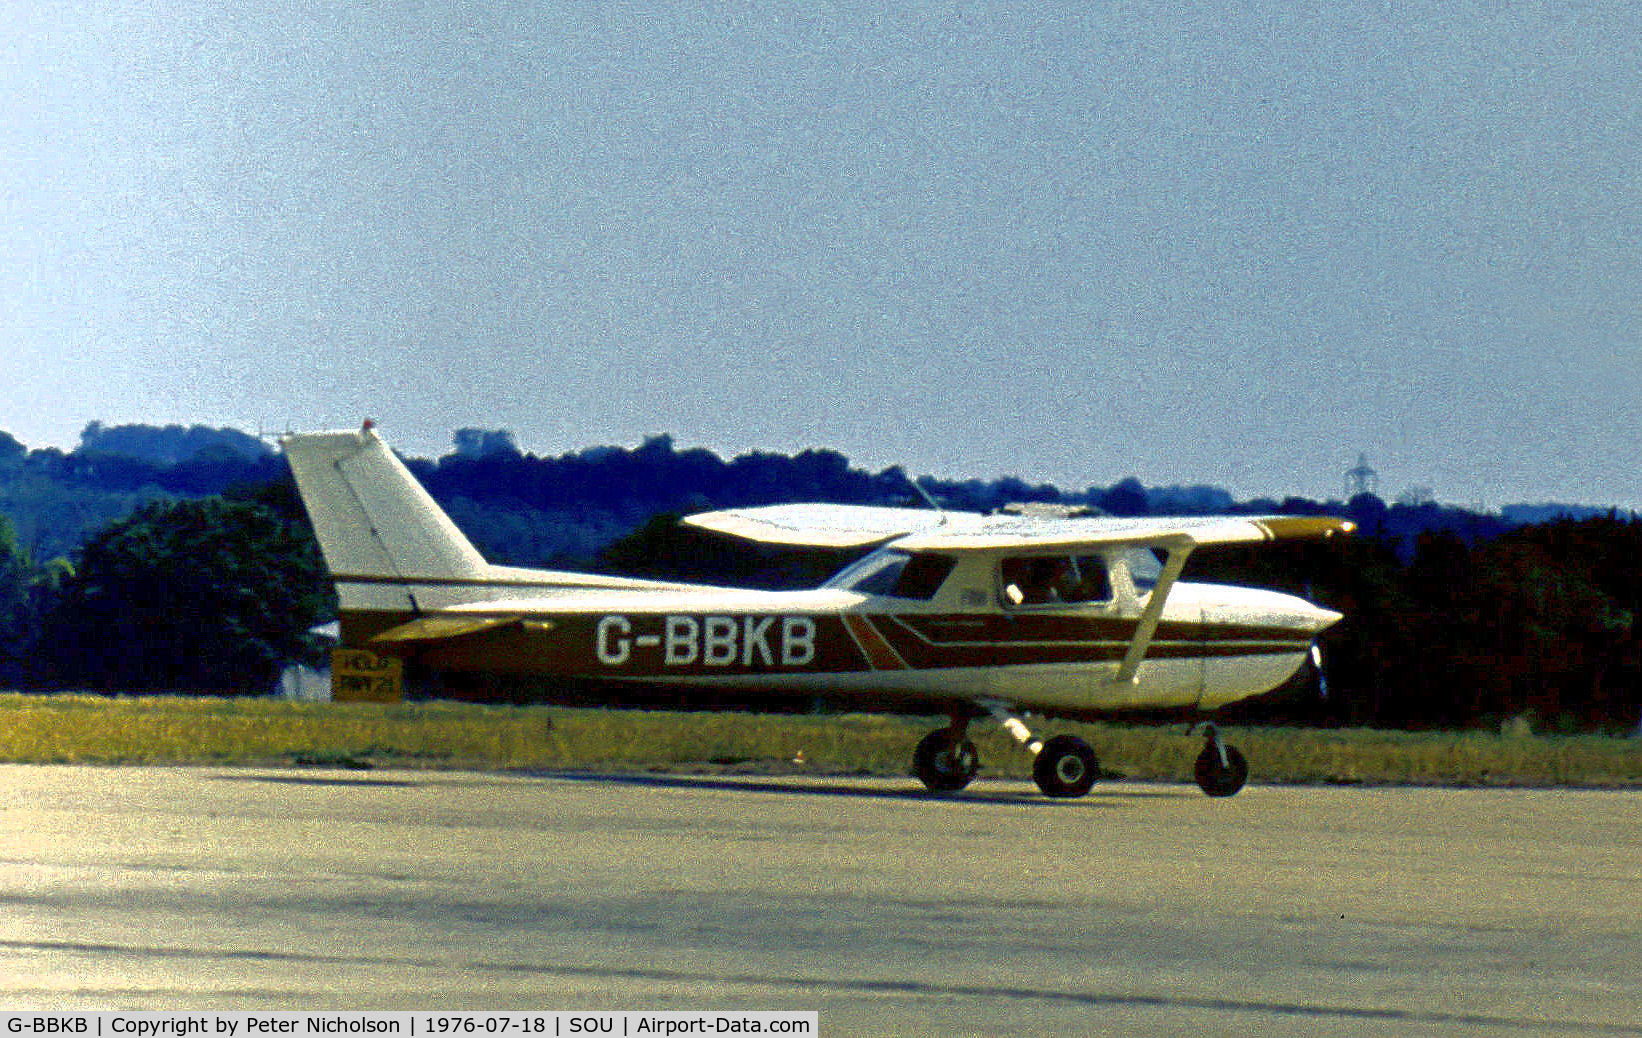 G-BBKB, 1973 Reims F150L C/N 1030, Reims F.150L as seen at Eastleigh, as Southampton Airport was then known, in the Summer of 1976.